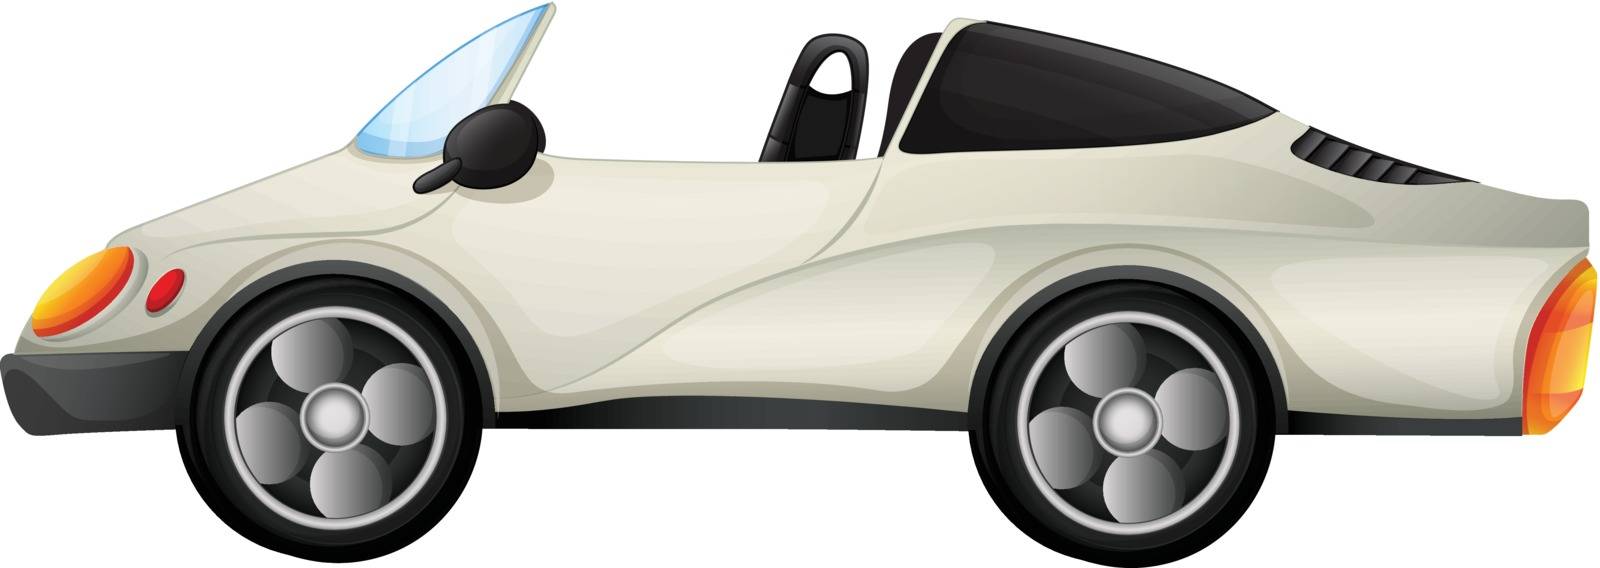 Illustration of an elegant sports car on a white background